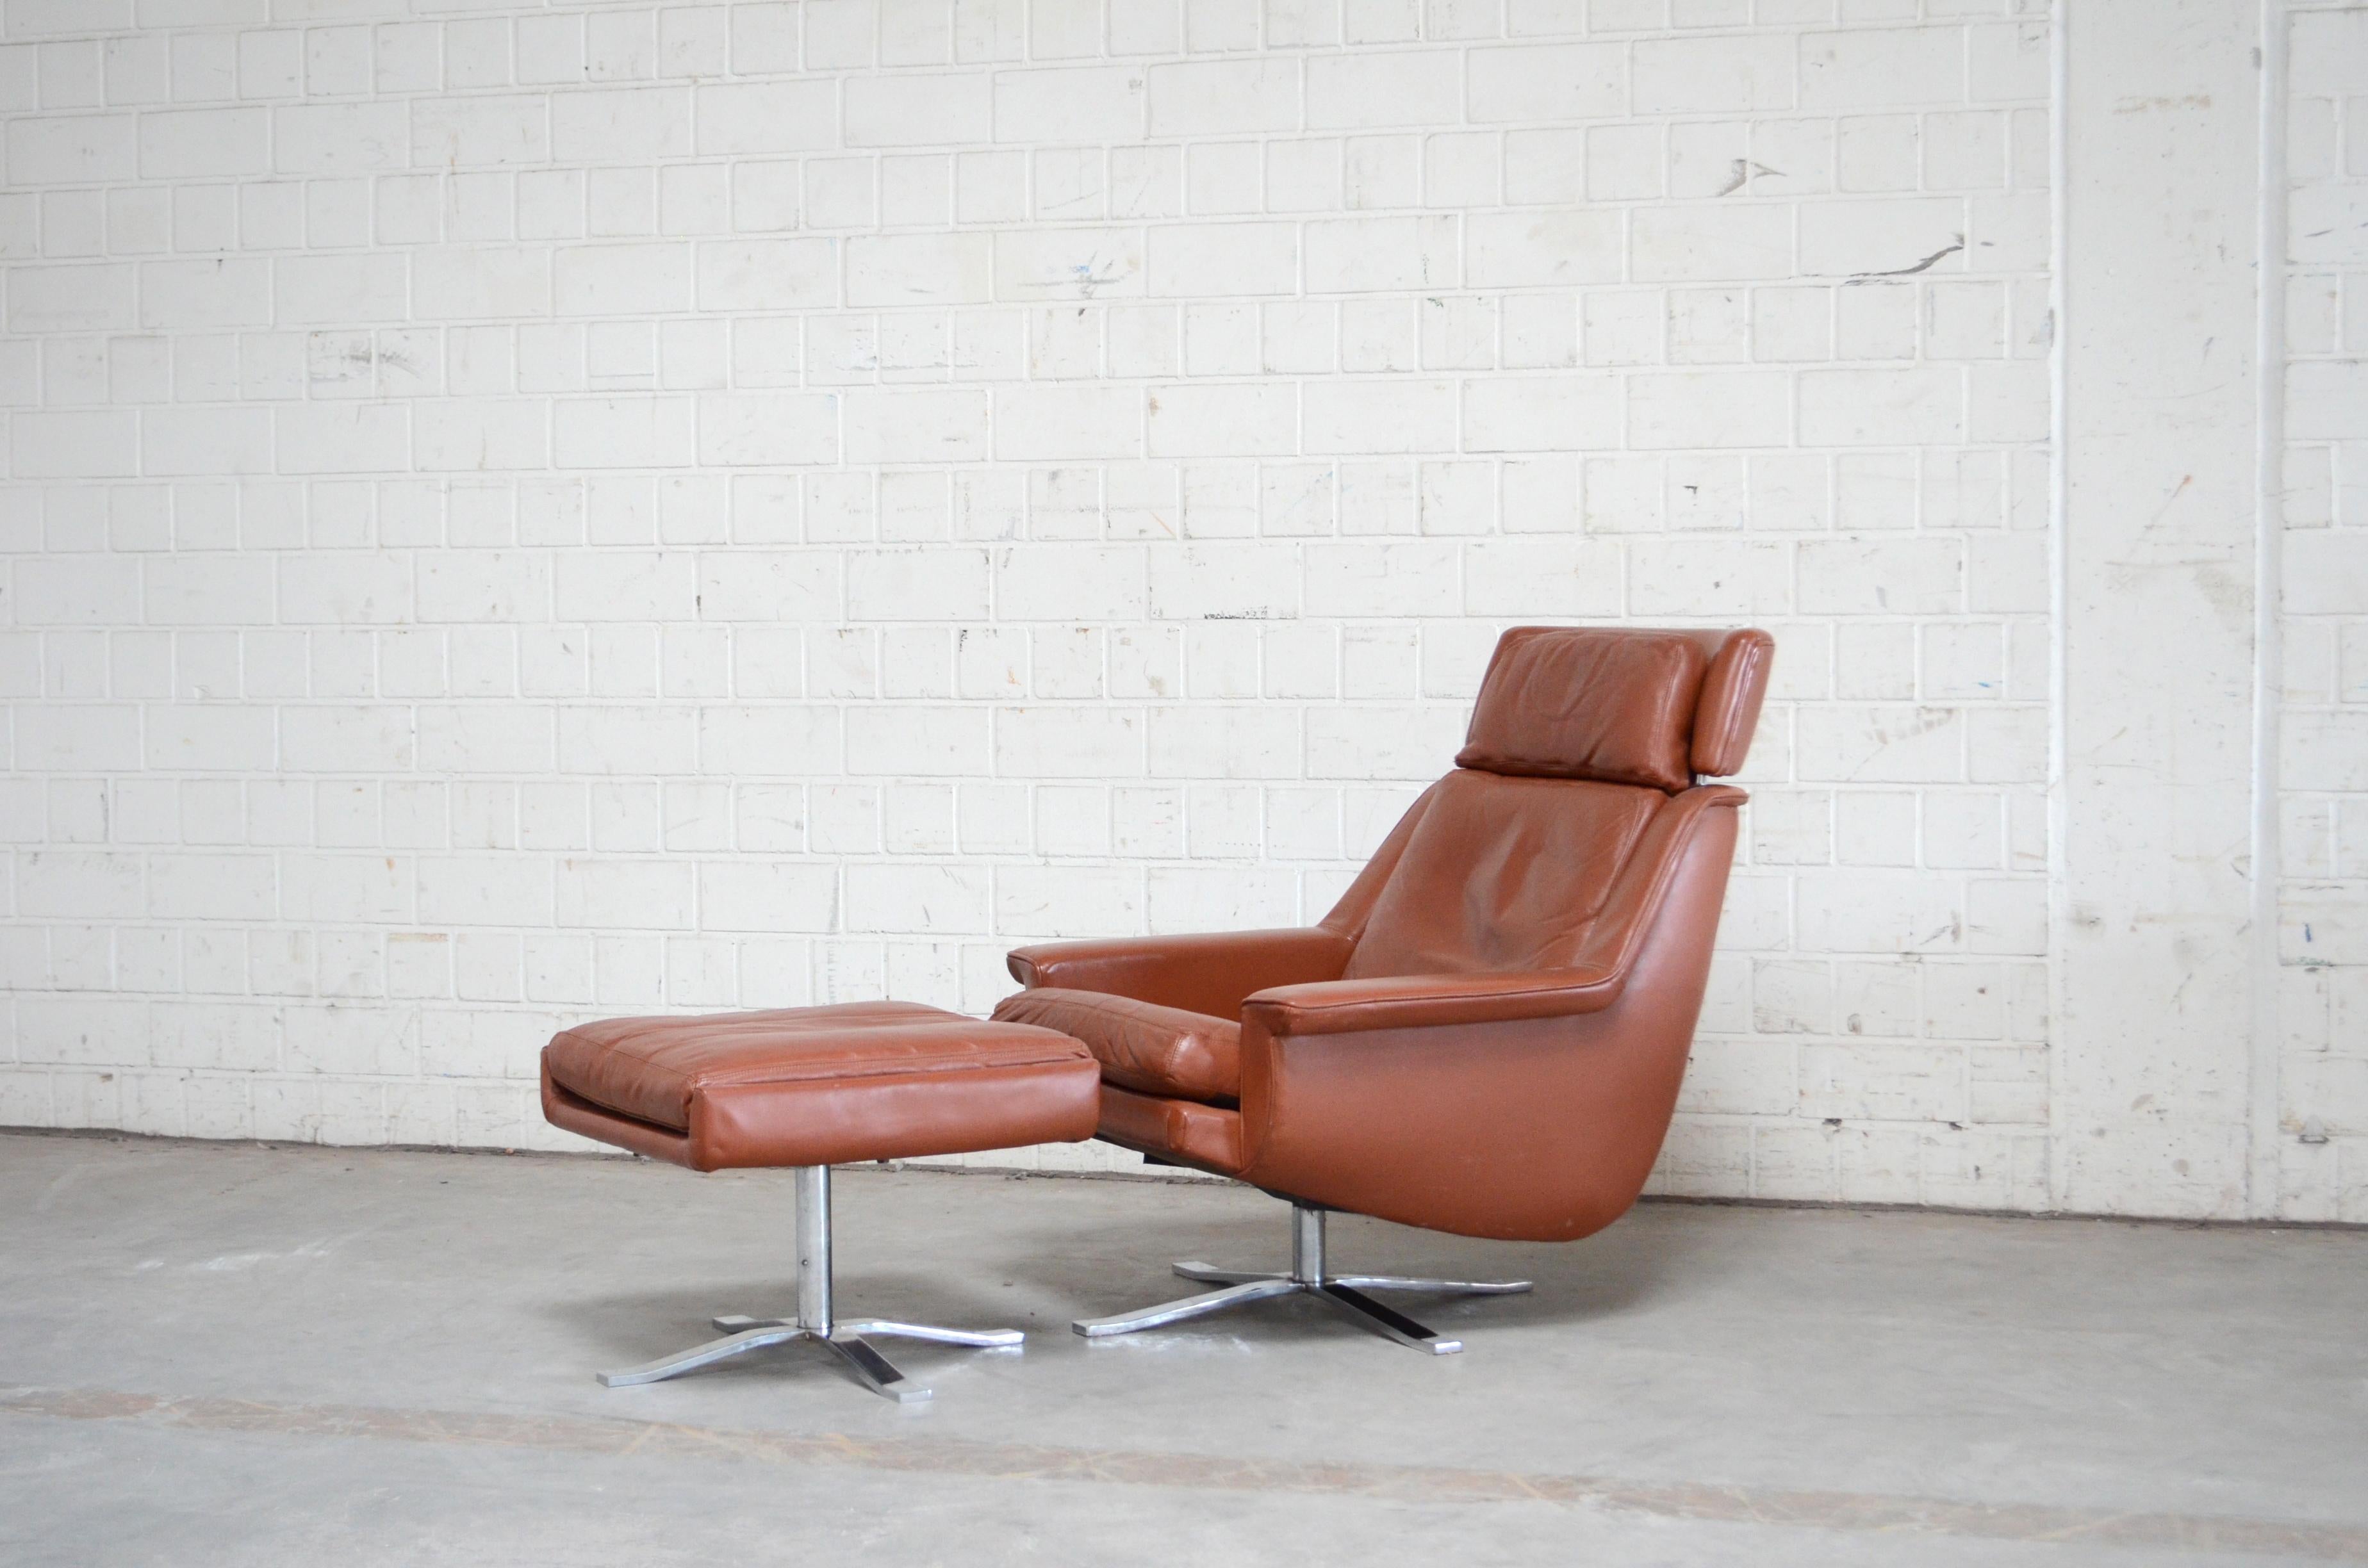 ESA Moebelwerk Denmark Model 802 lounge chair and ottoman. The design is from Werner Langenfeld during the 1960s
This armchair and ottoman was produced in Denmark and is made of red brandy aniline leather.
Rare model with a rare unique heavy